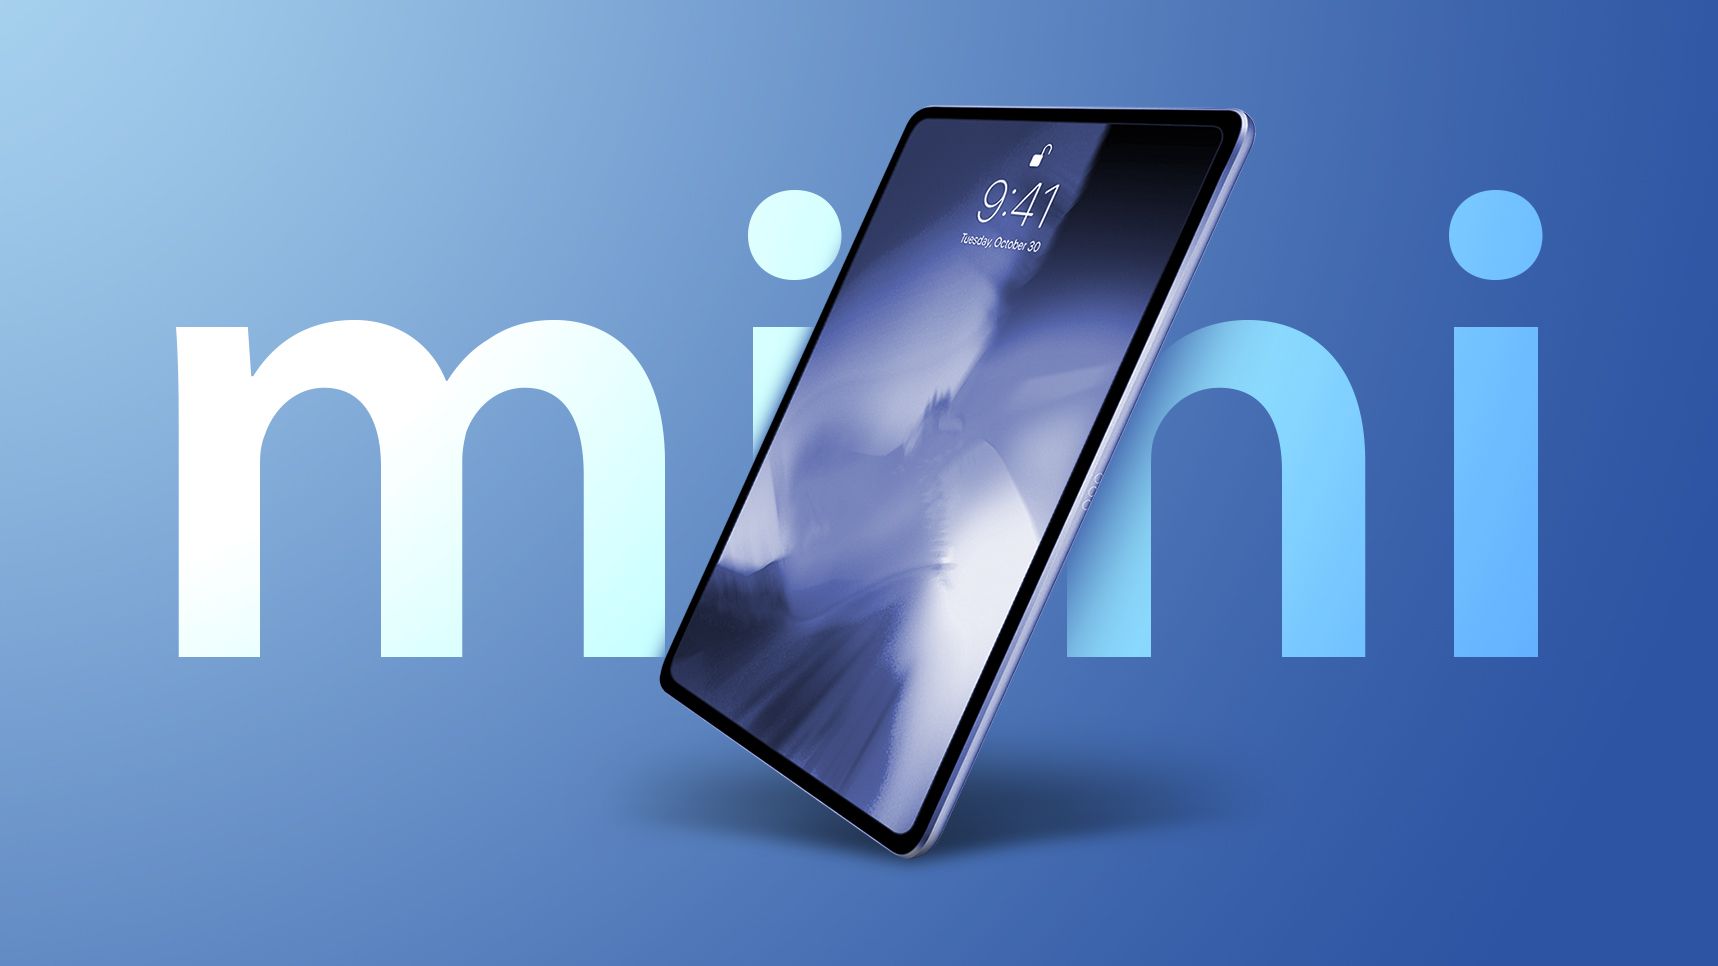 Outlined rumors claim ‘iPad Mini Pro’ launched in the second half of 2021